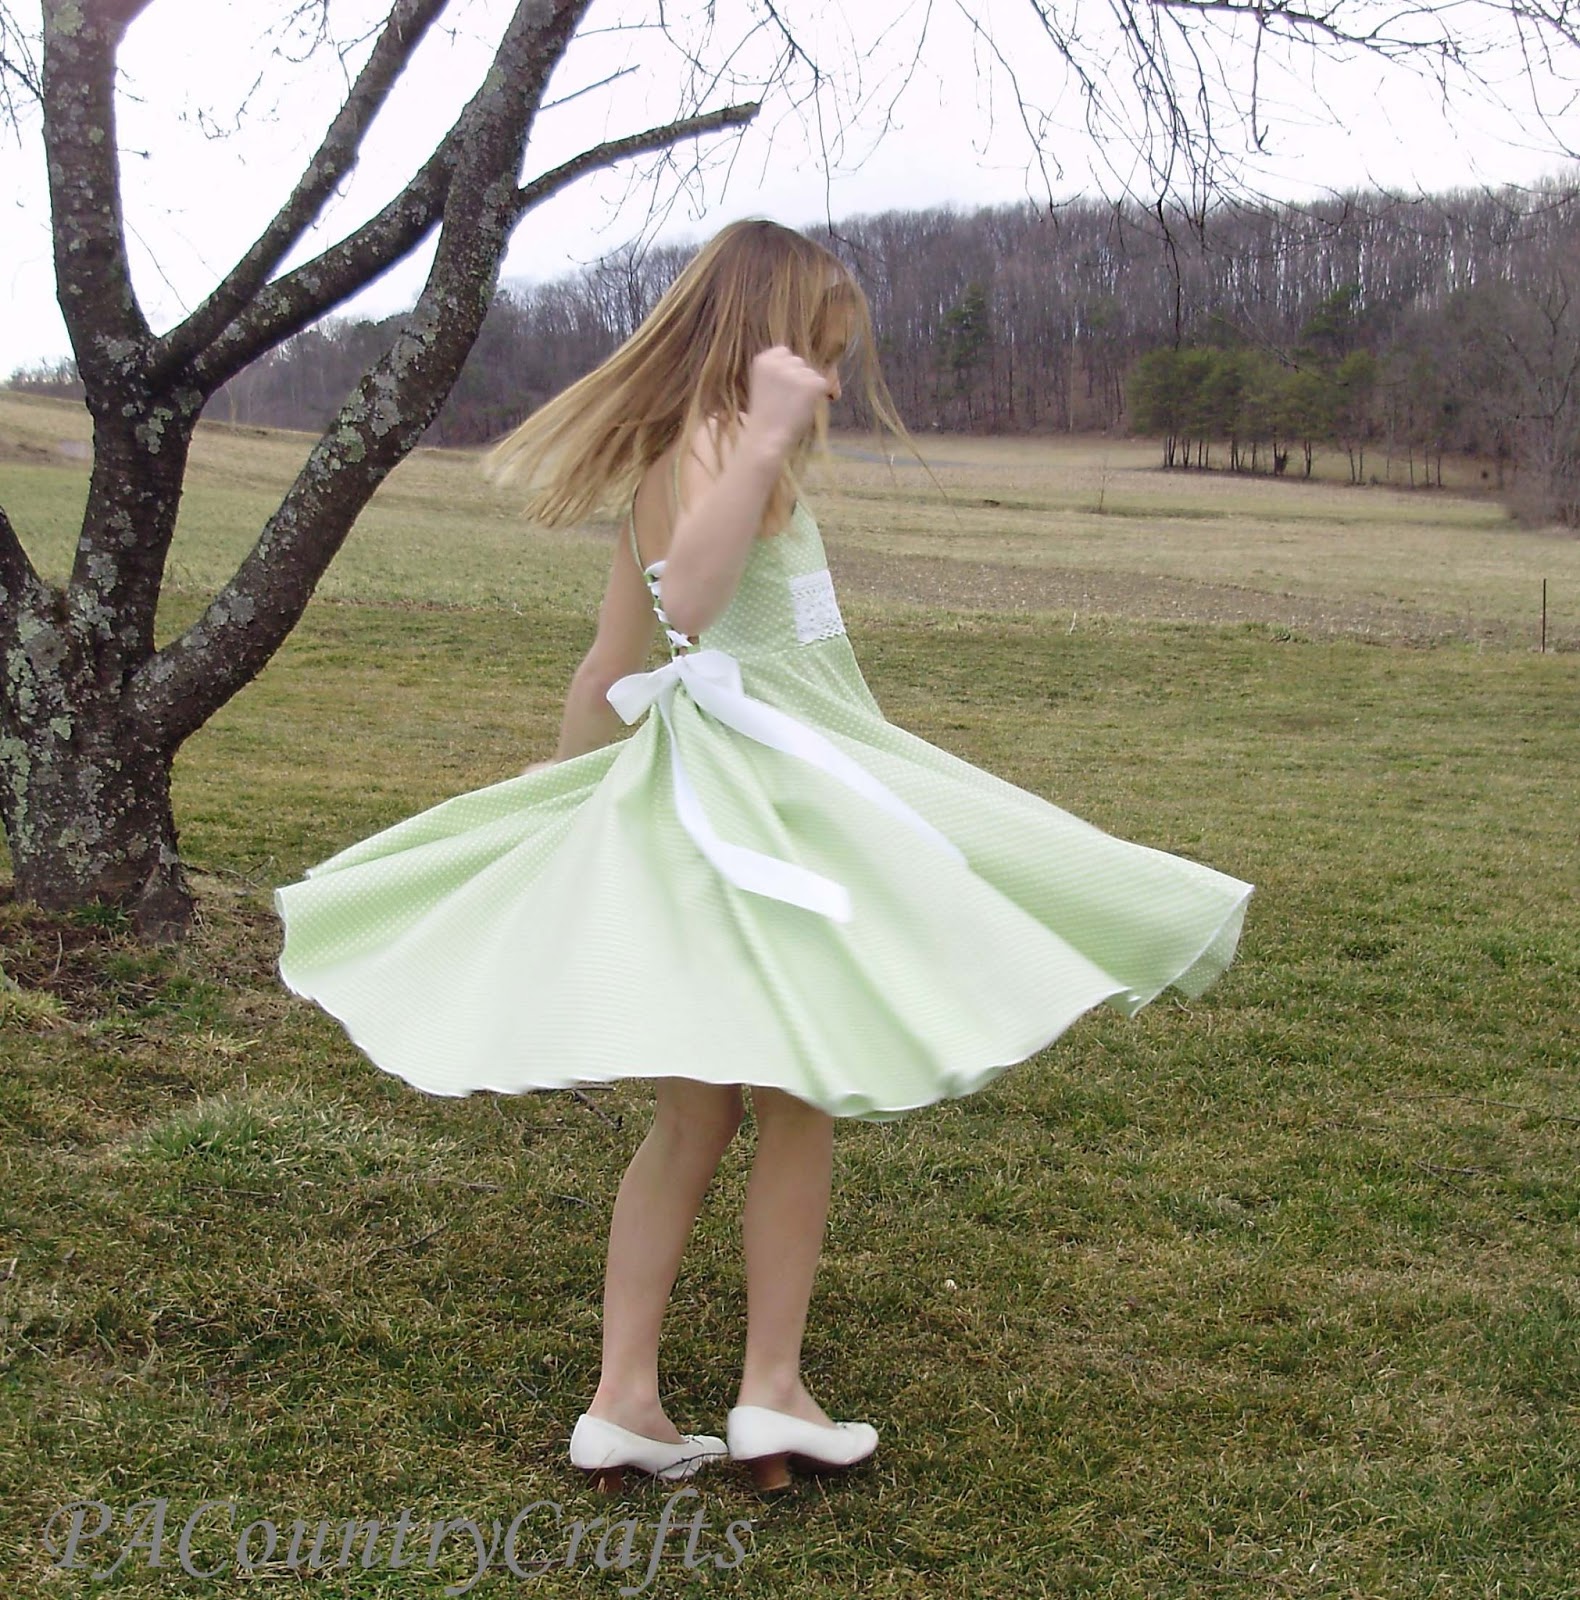 Sneak Peek at the First Easter Dress! | PA Country Crafts